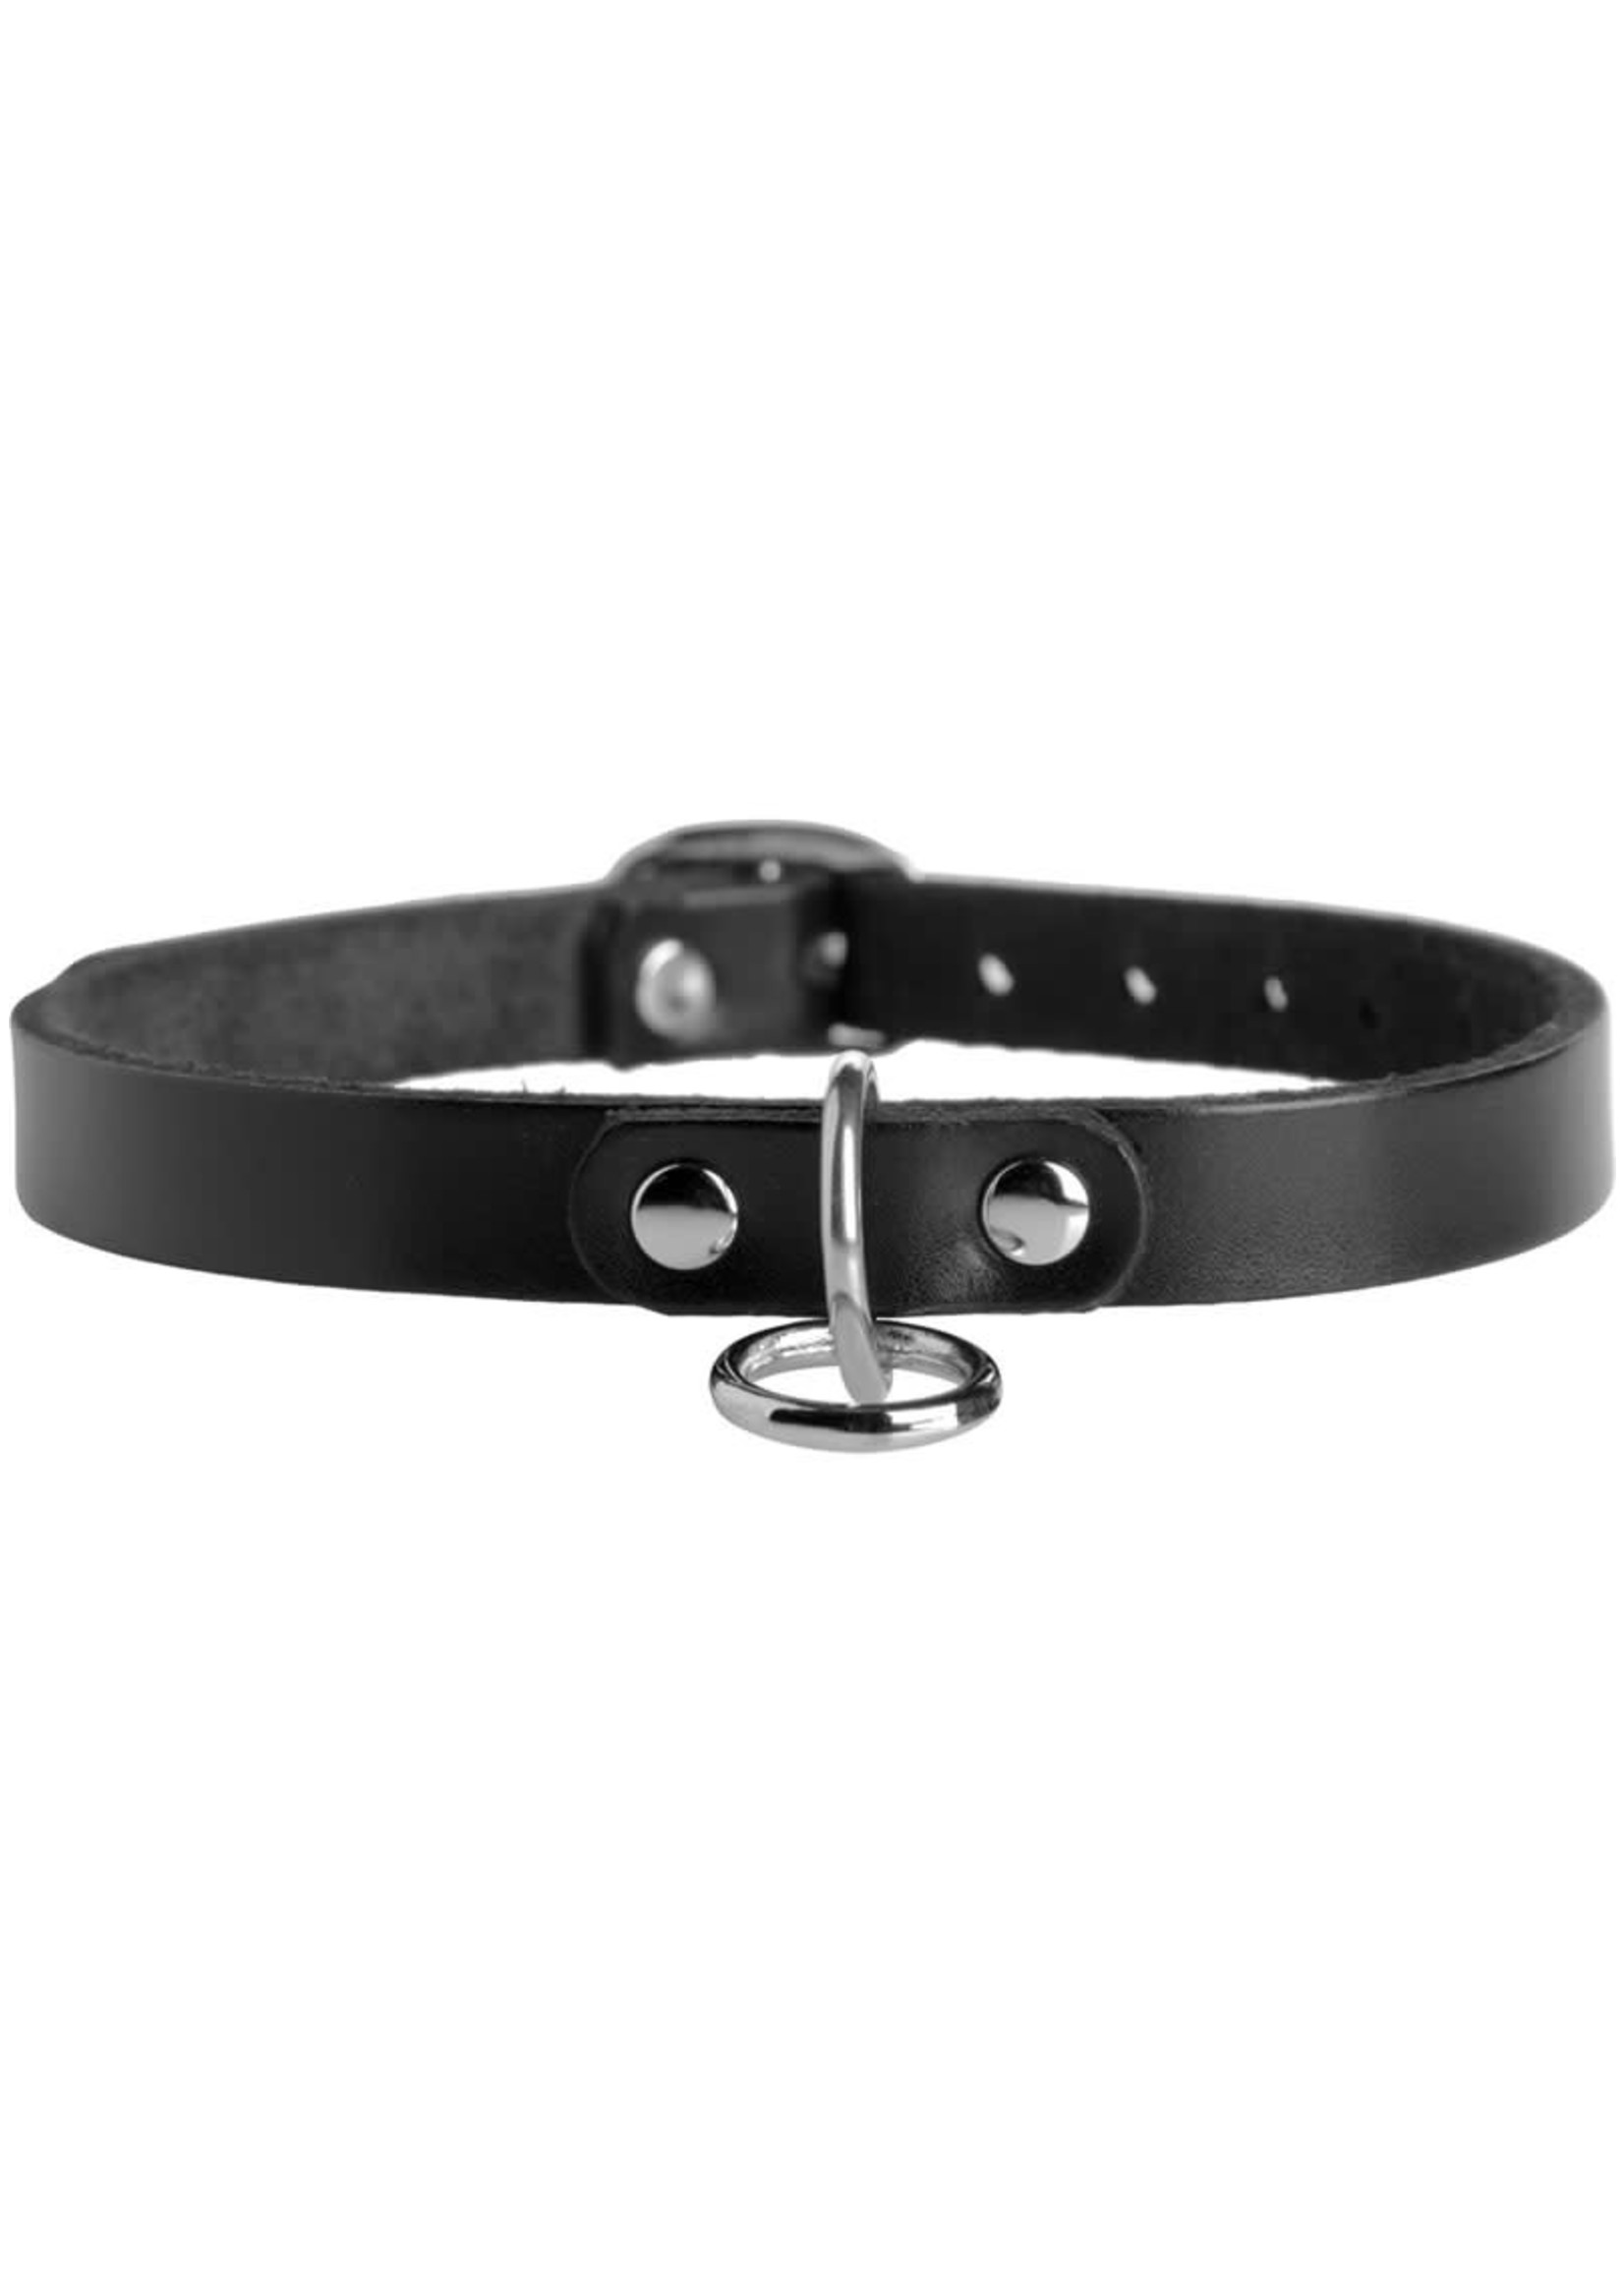 Strict Leather Unisex Choker with O-Ring